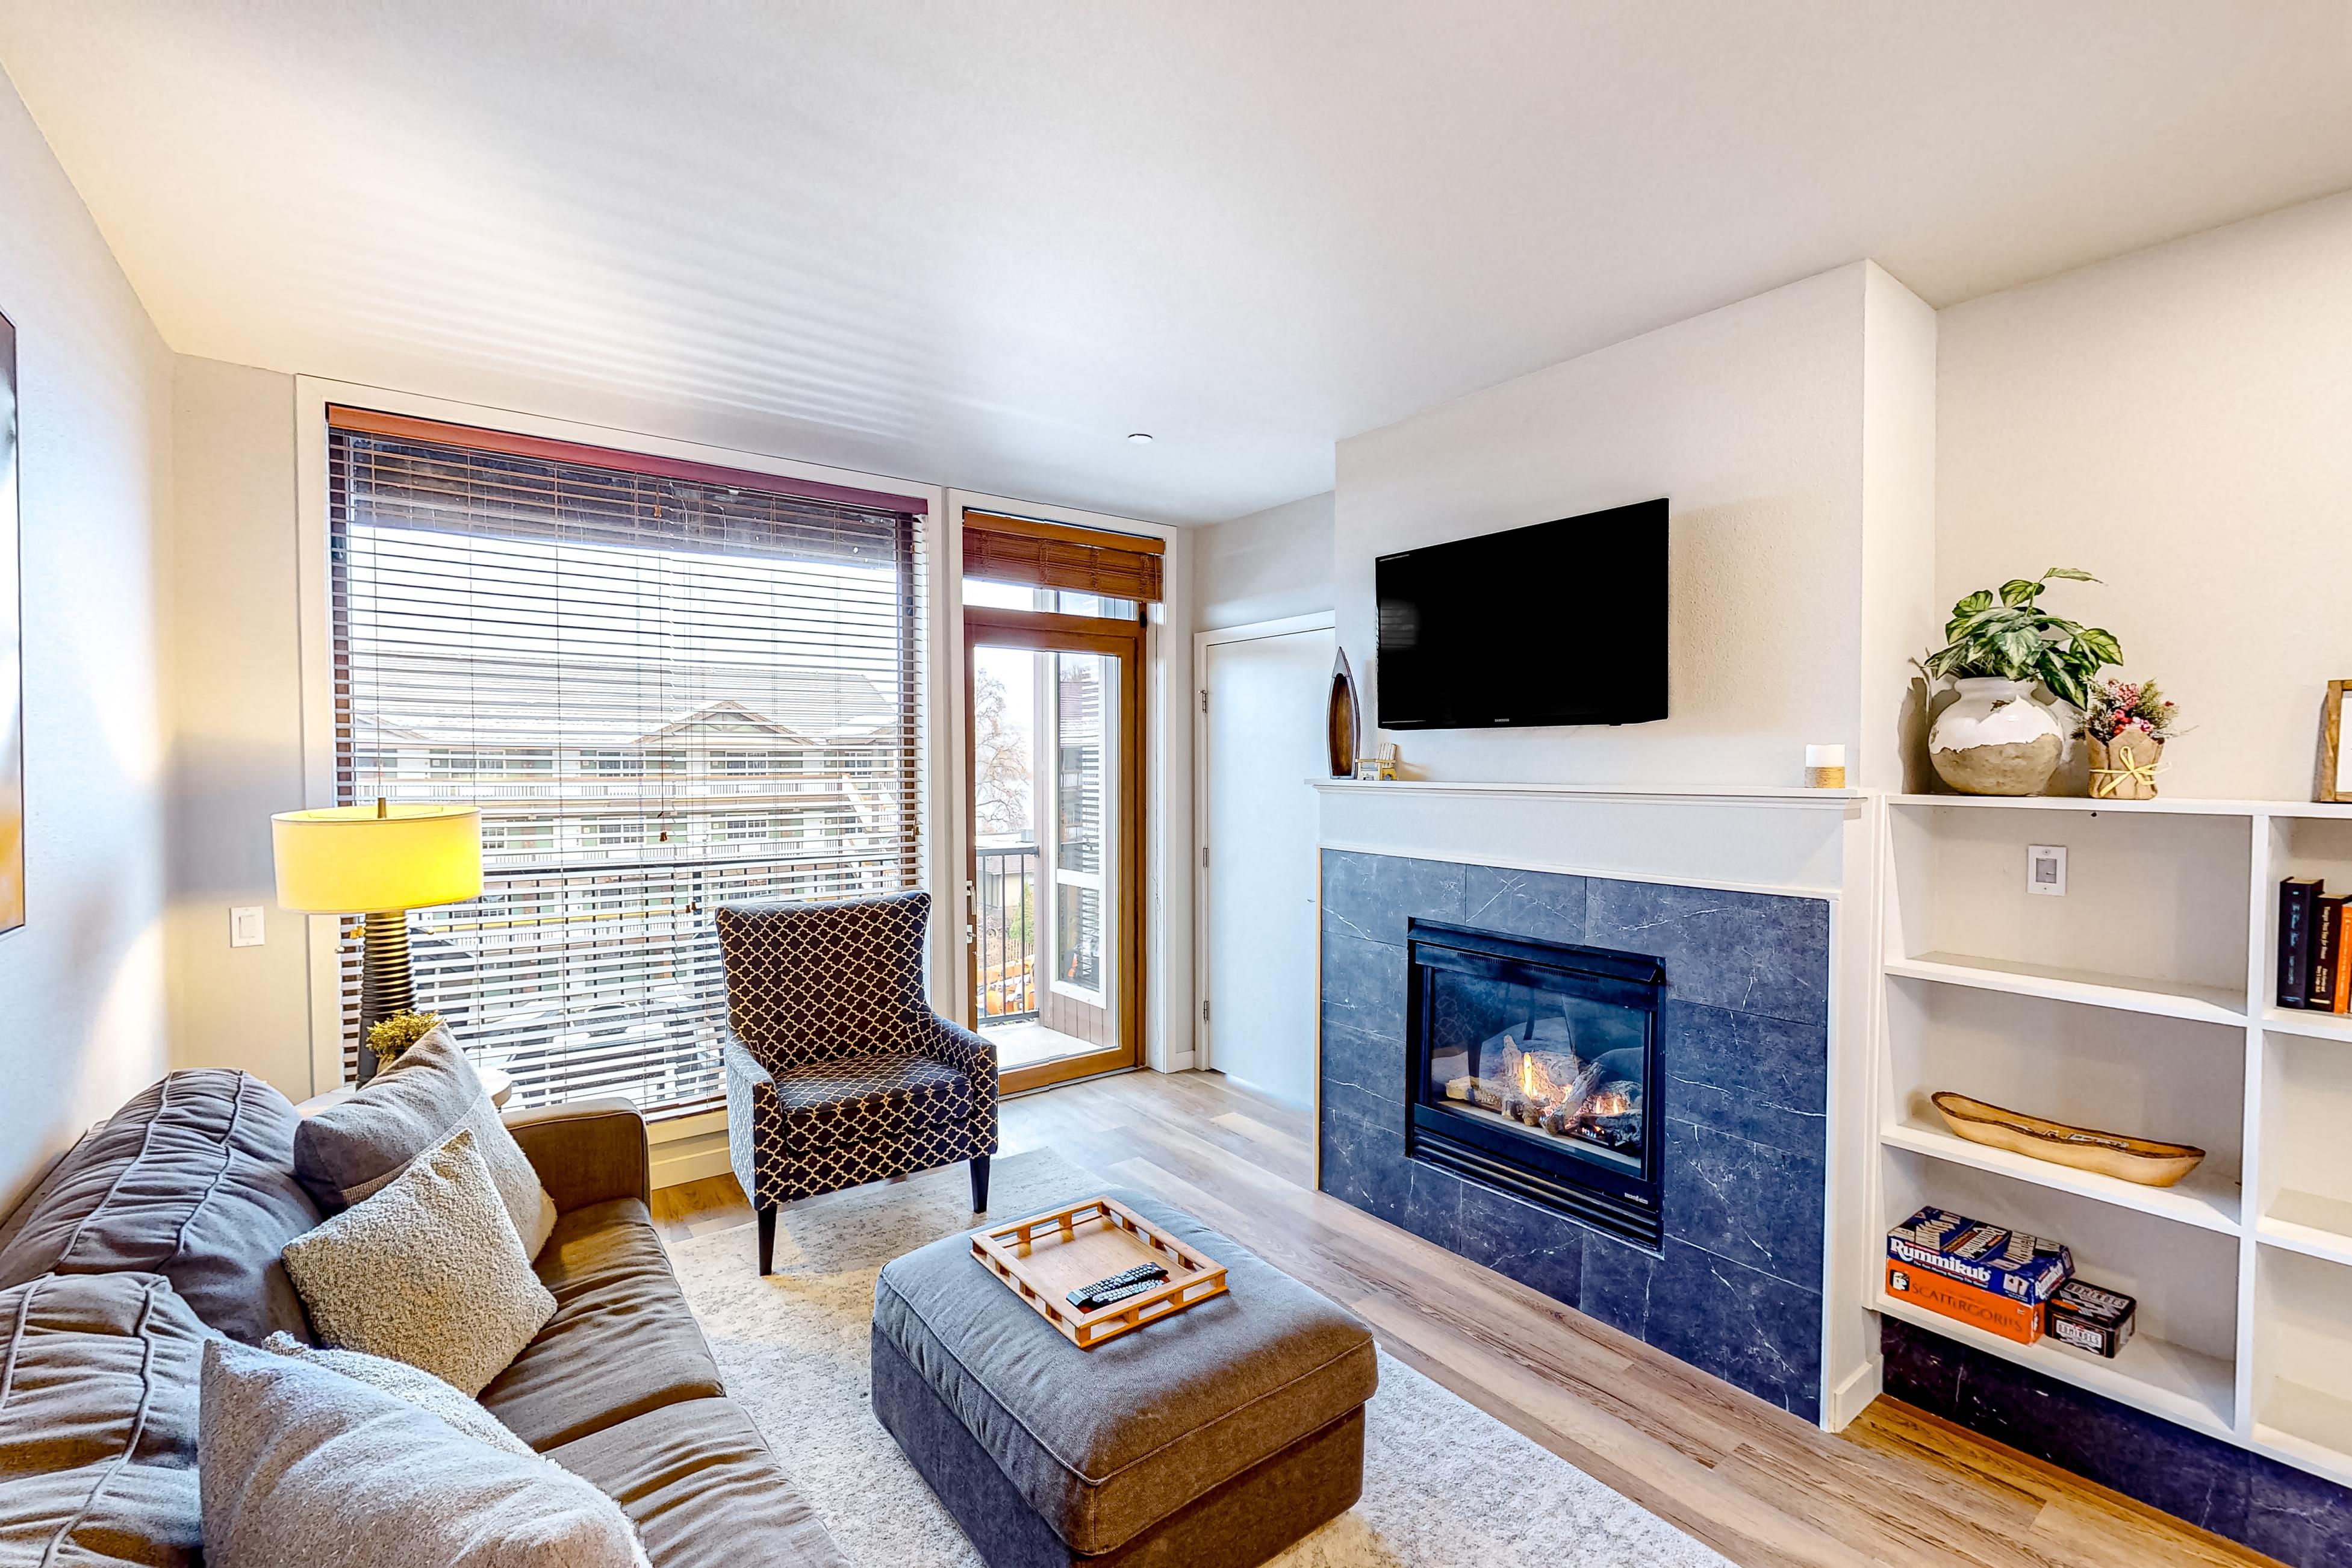 Property Image 1 - Chelan Resort Suites: Lakeside Holiday Suite #205